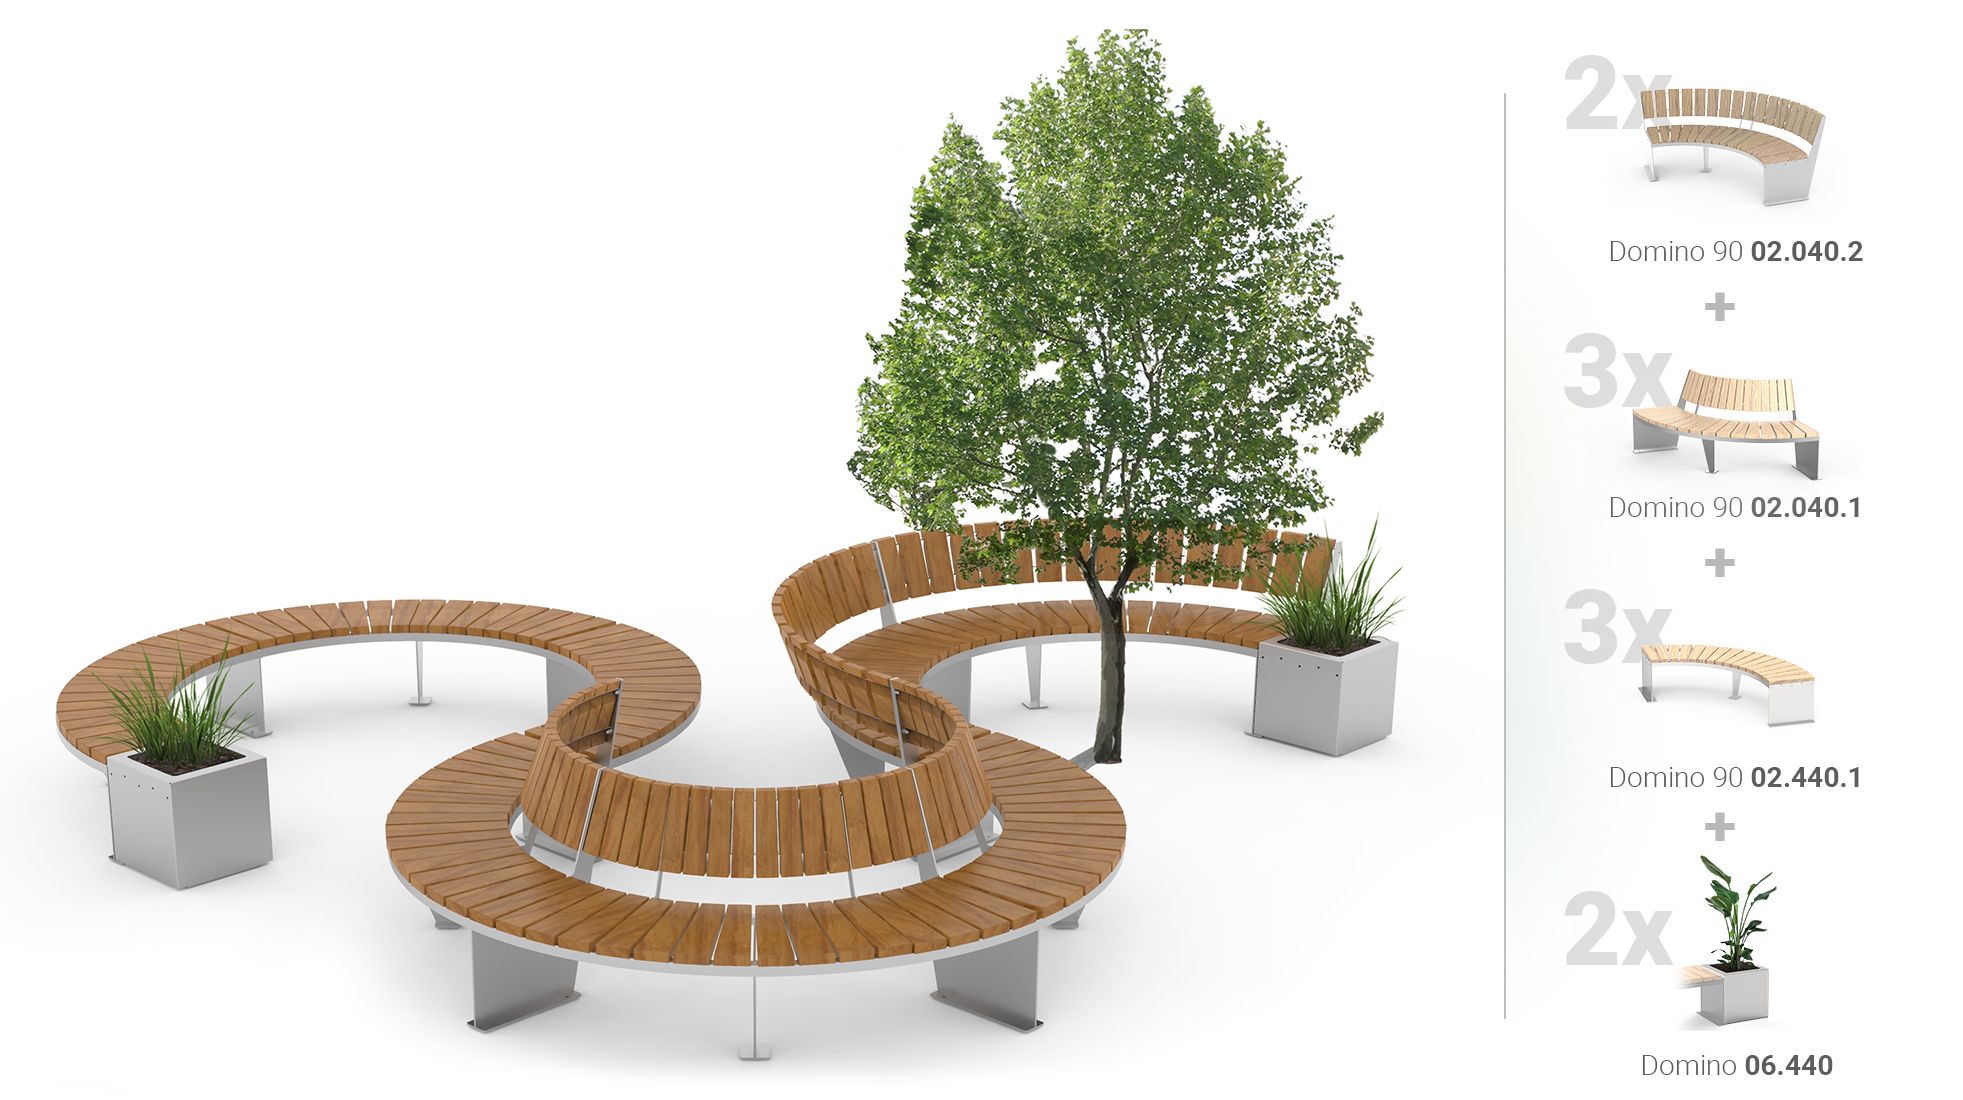 Set of urban benches with planters